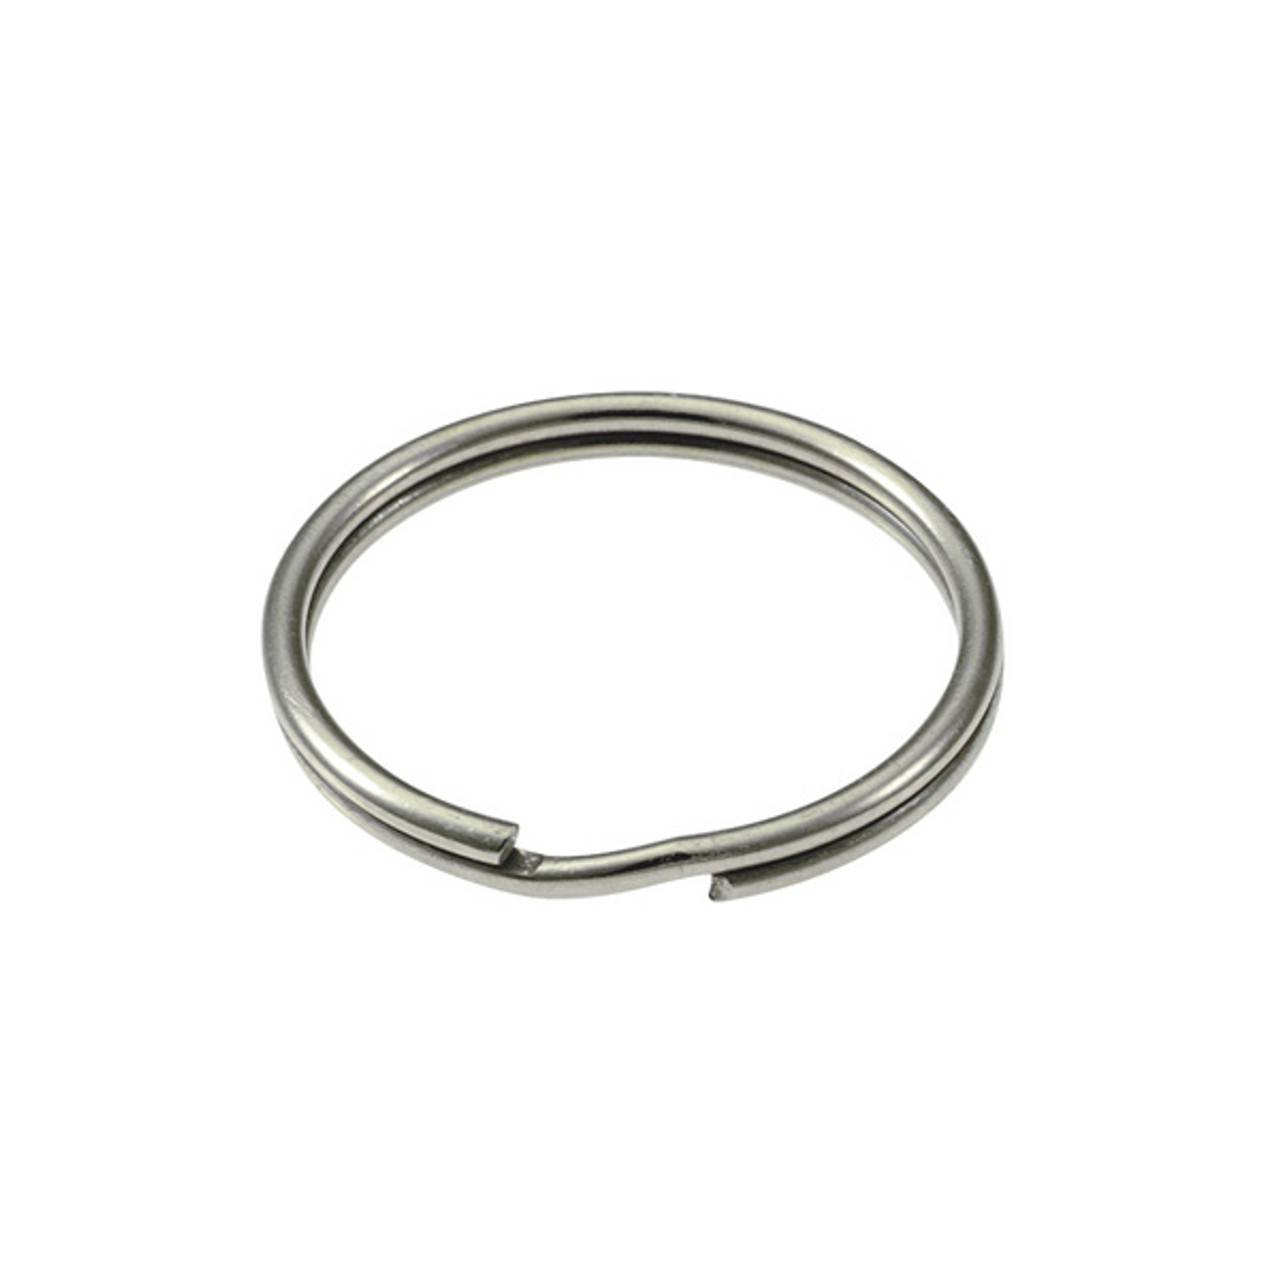 Shop for and Buy Heavy Duty Split Key Ring Nickel Plated 1-1/4 Inch  Diameter (USA)-Bulk Pack of 100 at . Large selection and bulk  discounts available.